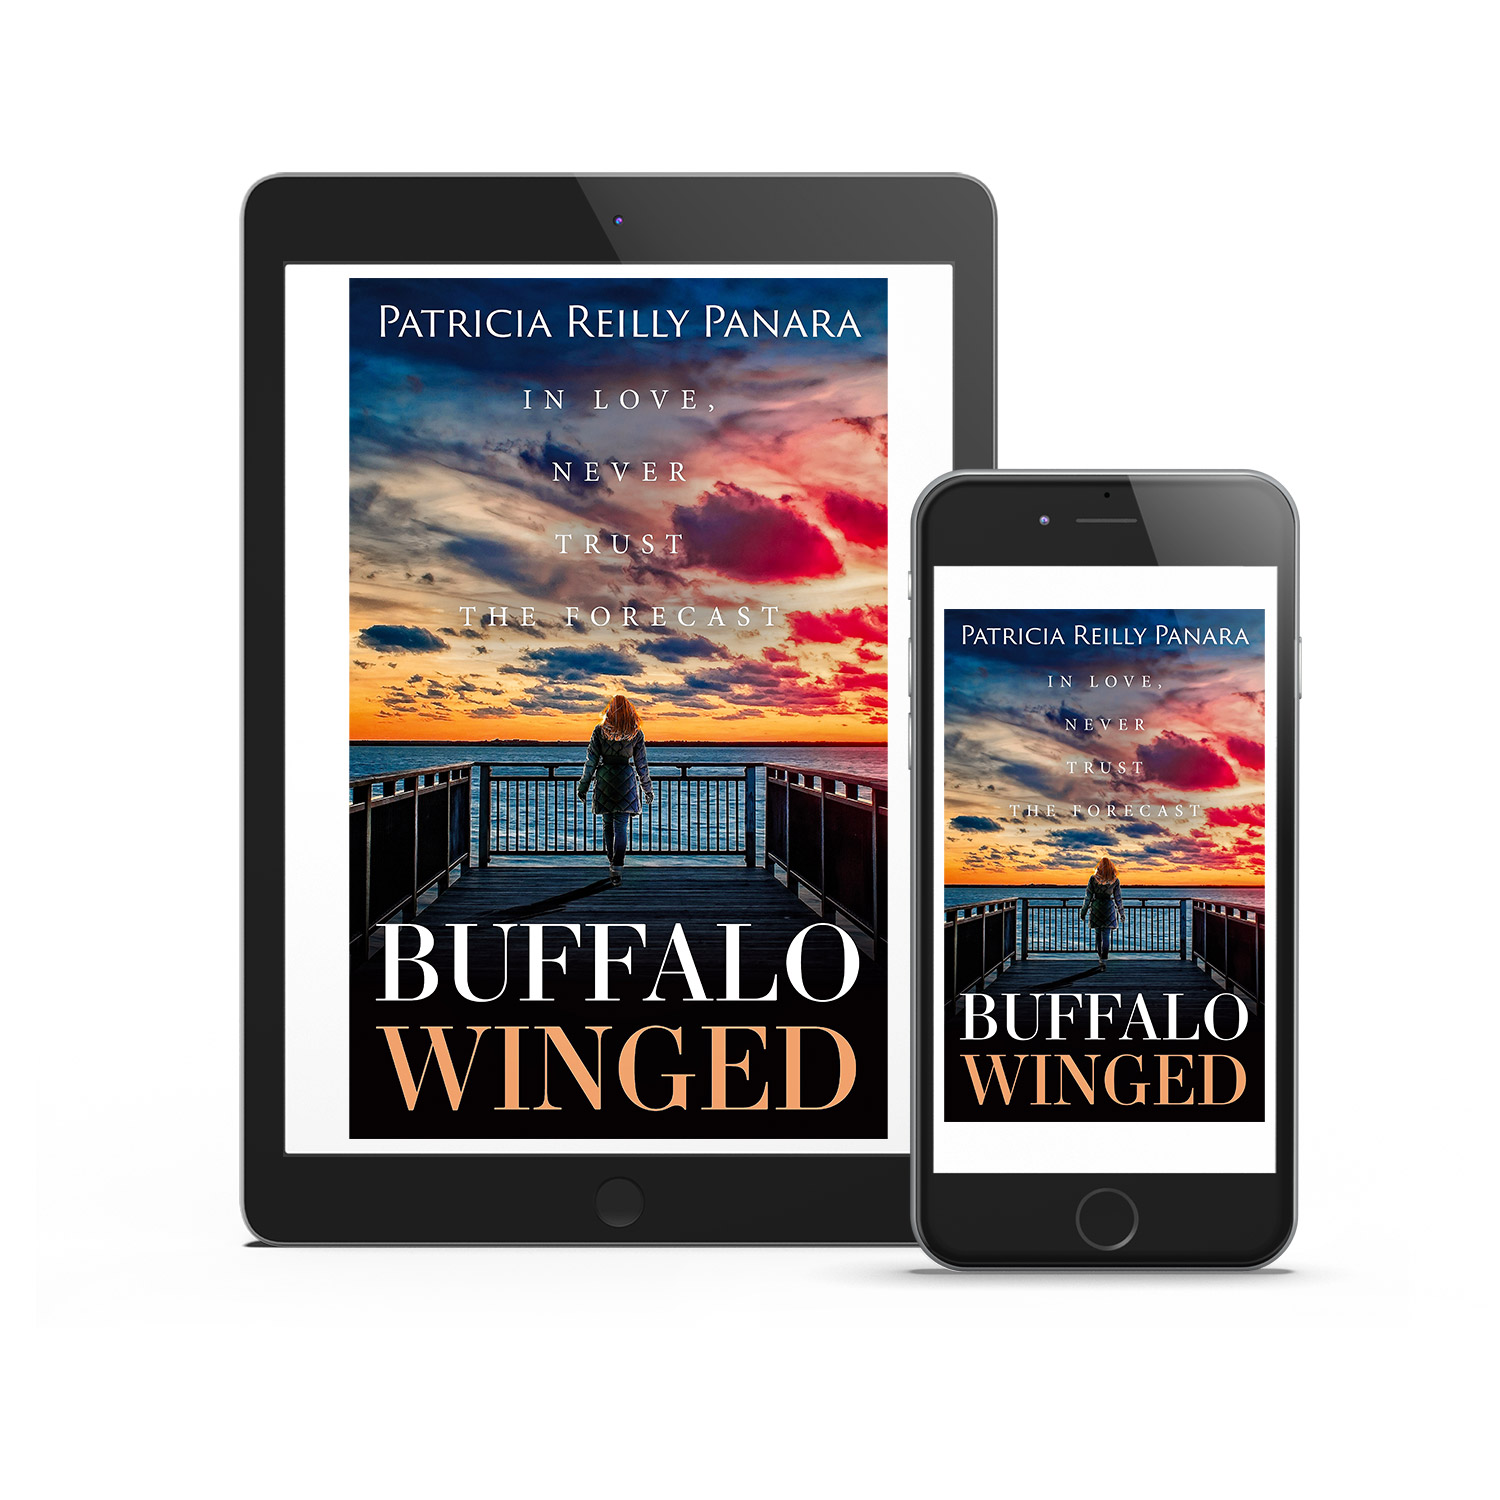 'Buffalo Winged' is a romantic novel, set in upstate New York. The author is Patricia Reilly Panara. The book cover and interior were designed by Mark Thomas, of coverness.com. To find out more about my book design services, please visit www.coverness.com.